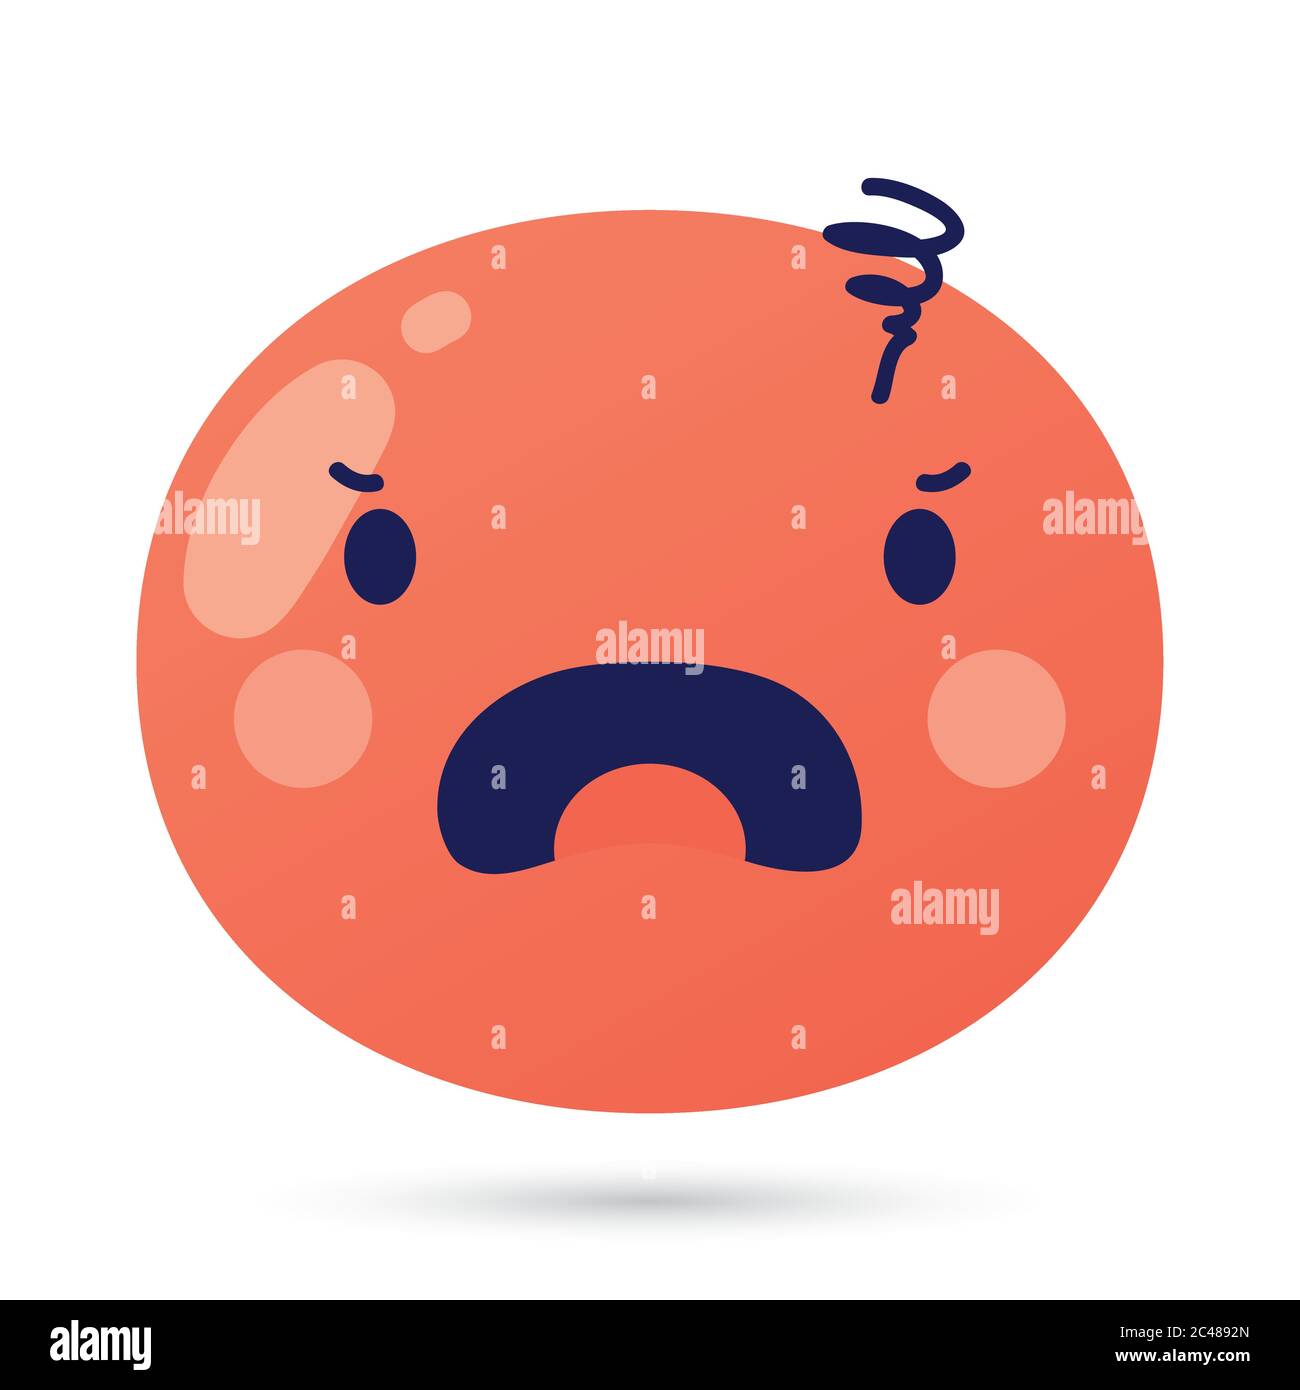 emoji face angry funny character vector illustration design Stock Vector